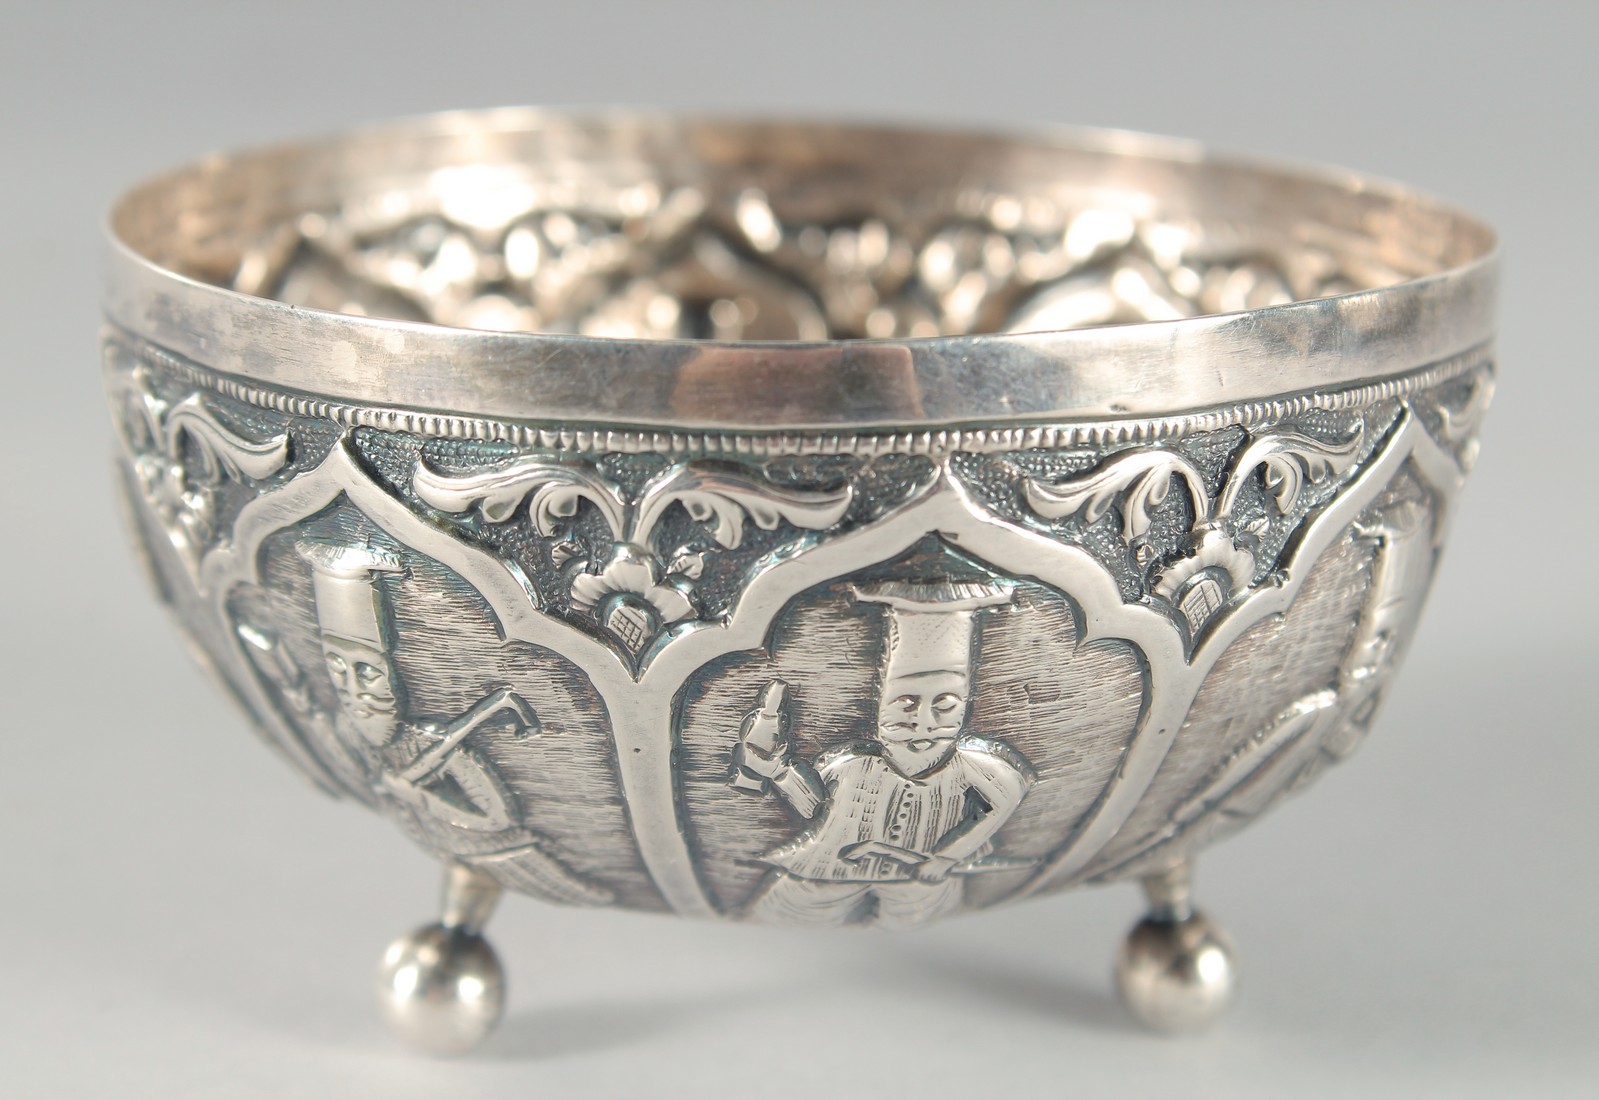 AN UNUSUAL 19TH CENTURY OTTOMAN GREEK OR ARMINIAN SILVER BOWL, with embossed and chased decoration - Image 3 of 5